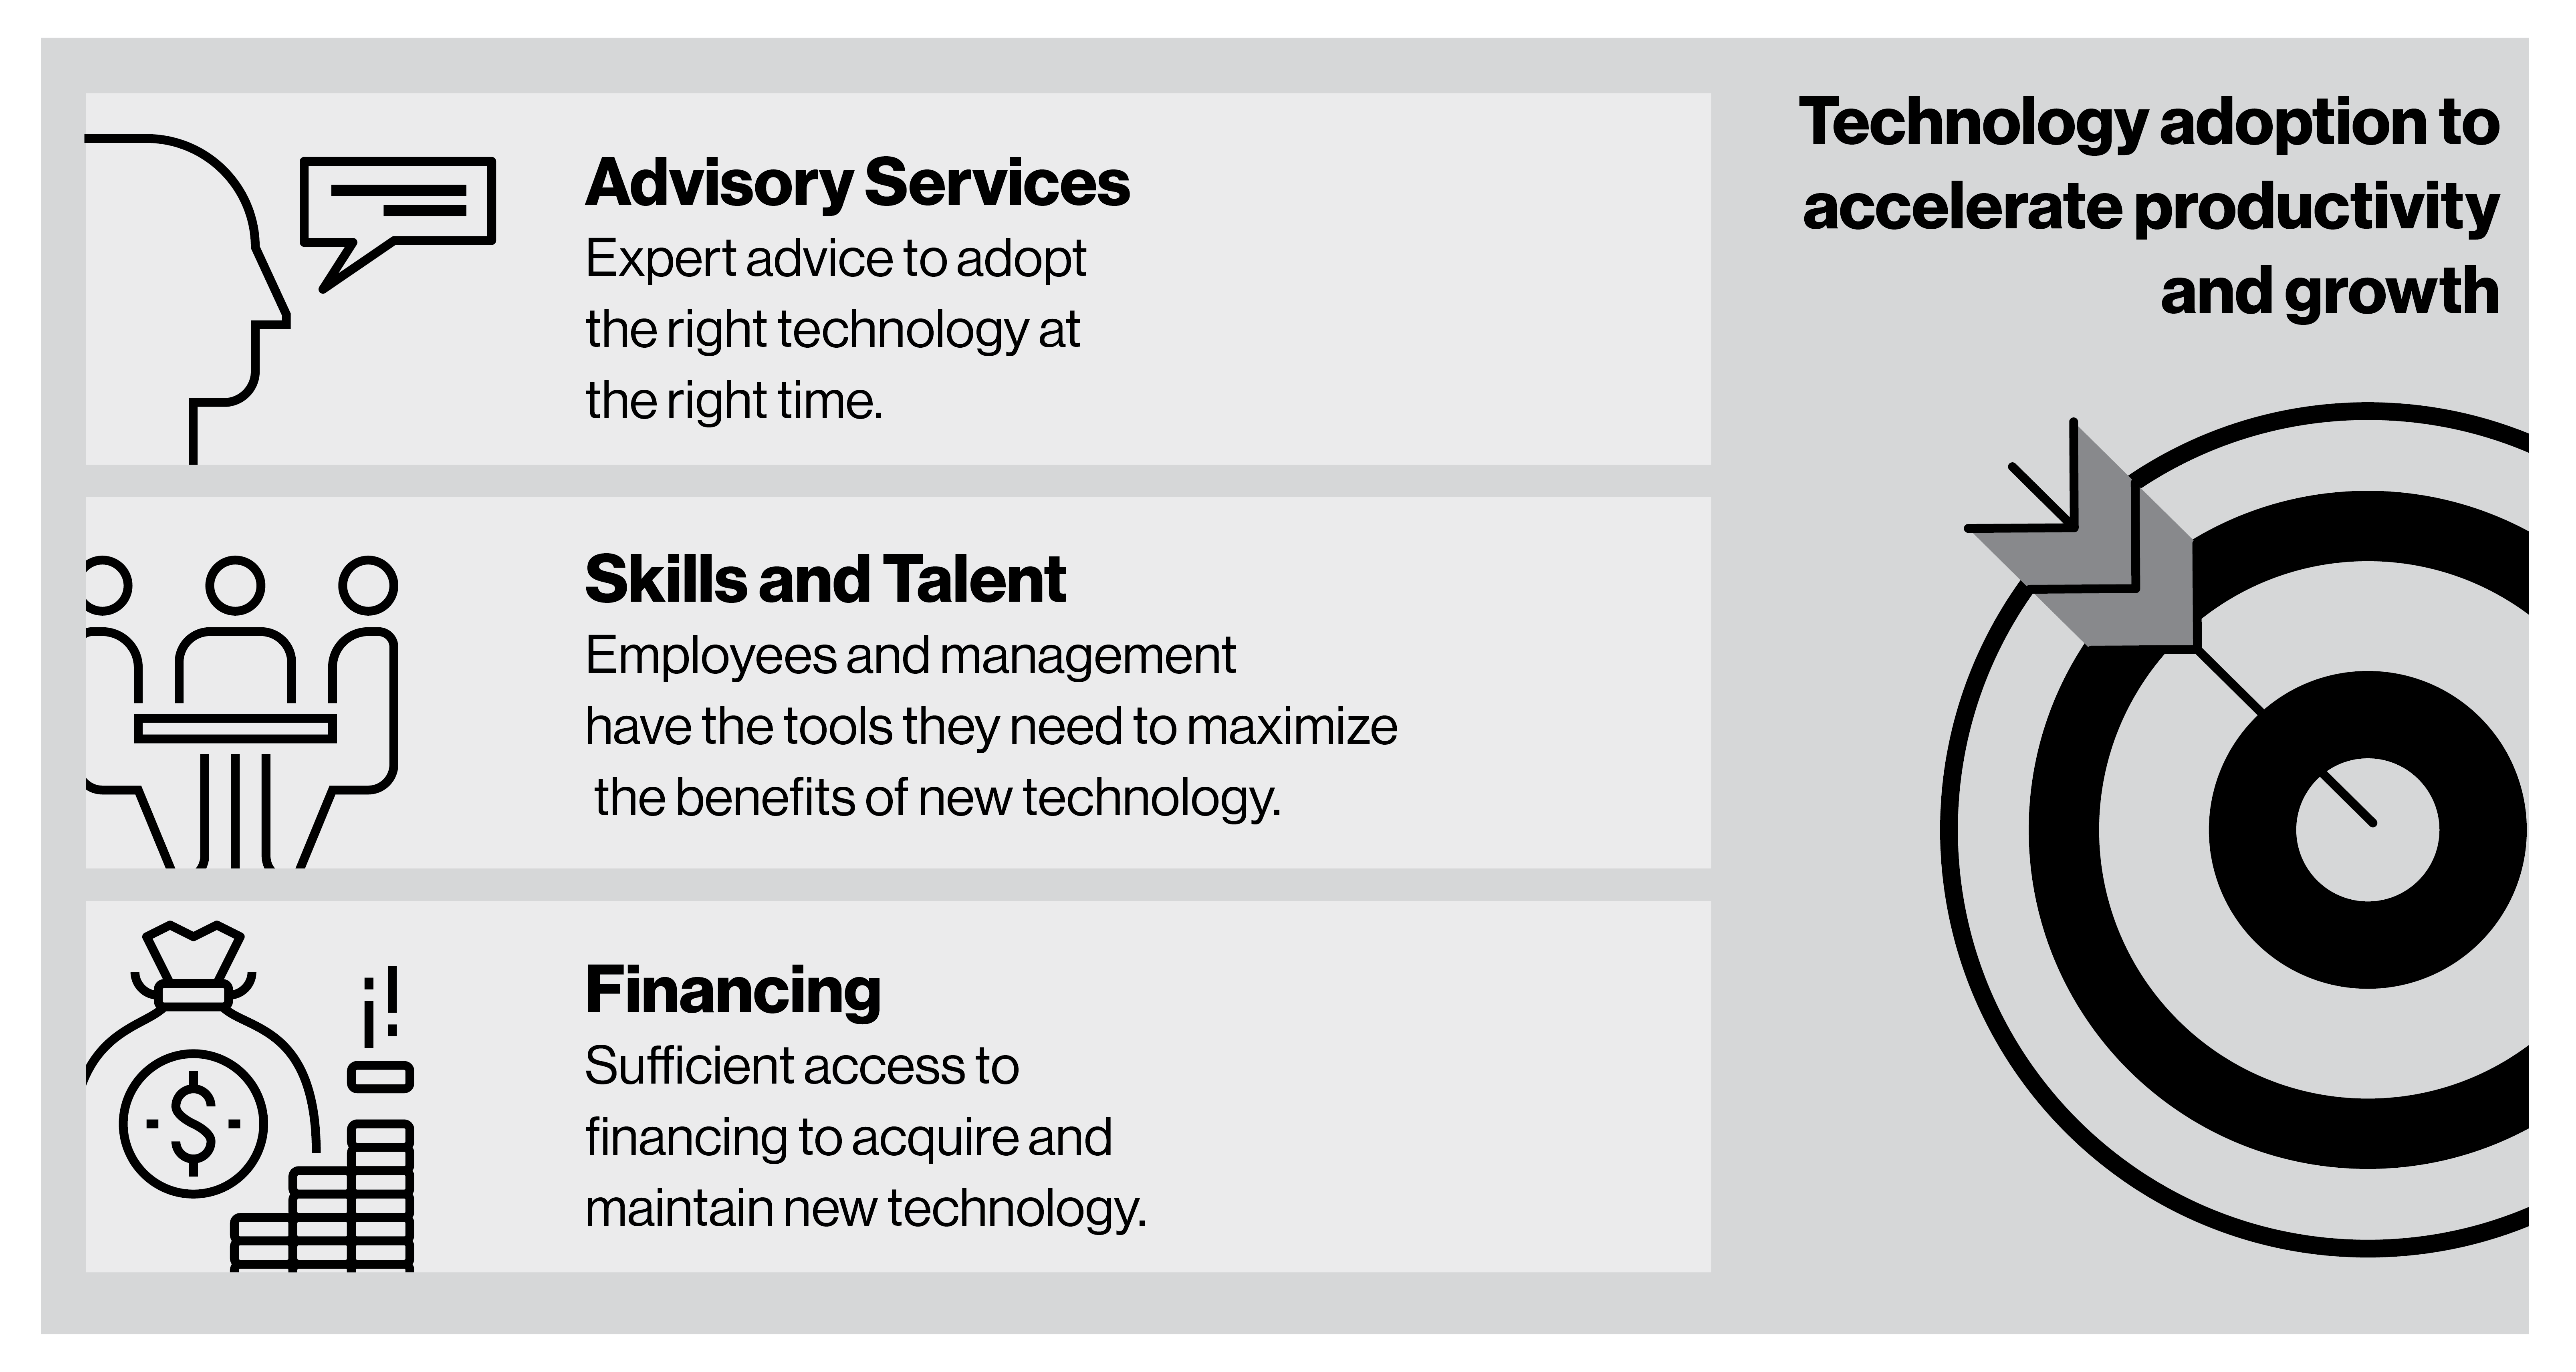 Figure  4.1: Technology adoption to accelerate productivity and growth